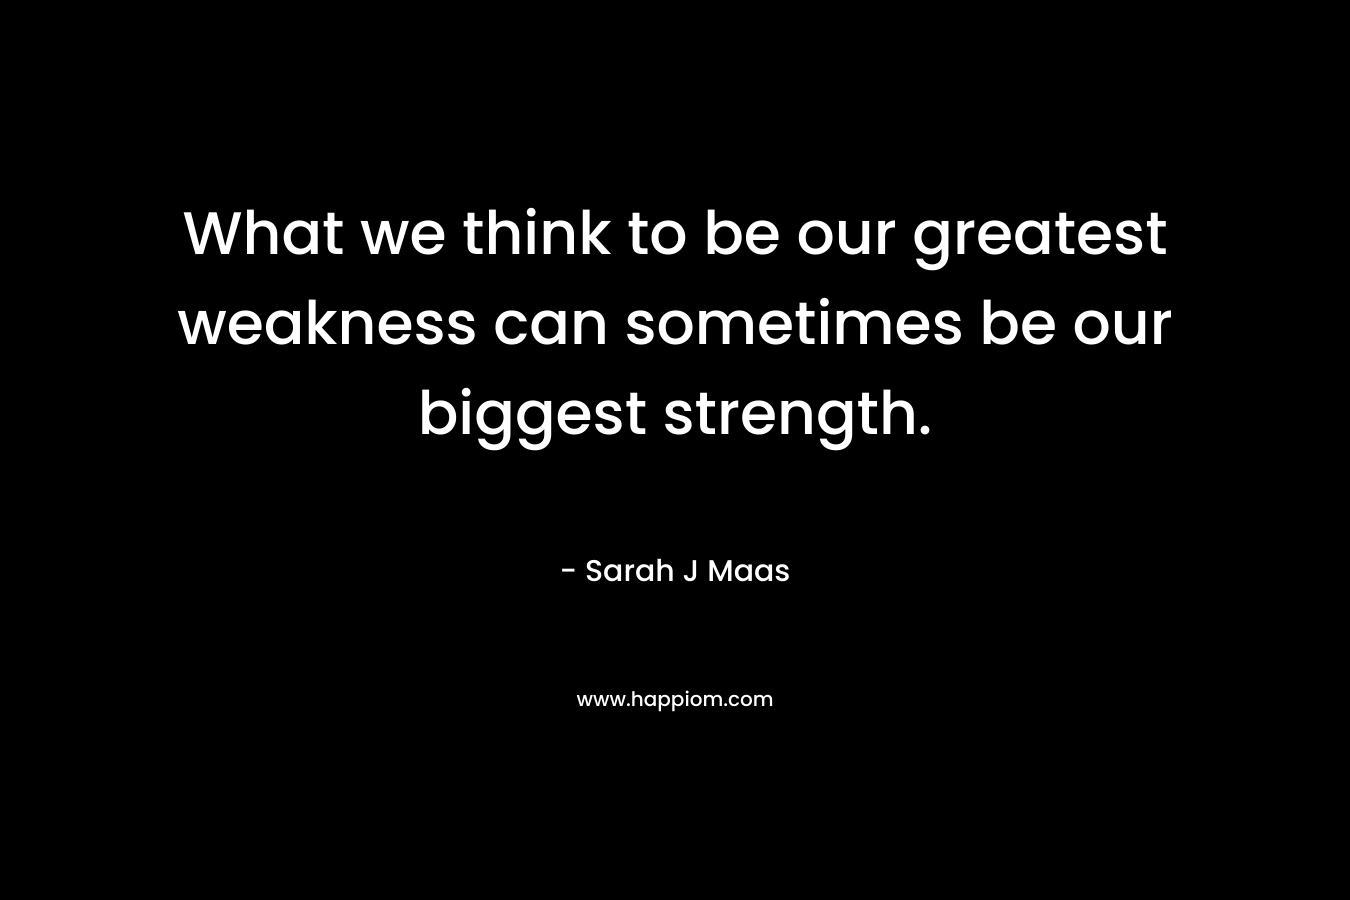 What we think to be our greatest weakness can sometimes be our biggest strength.